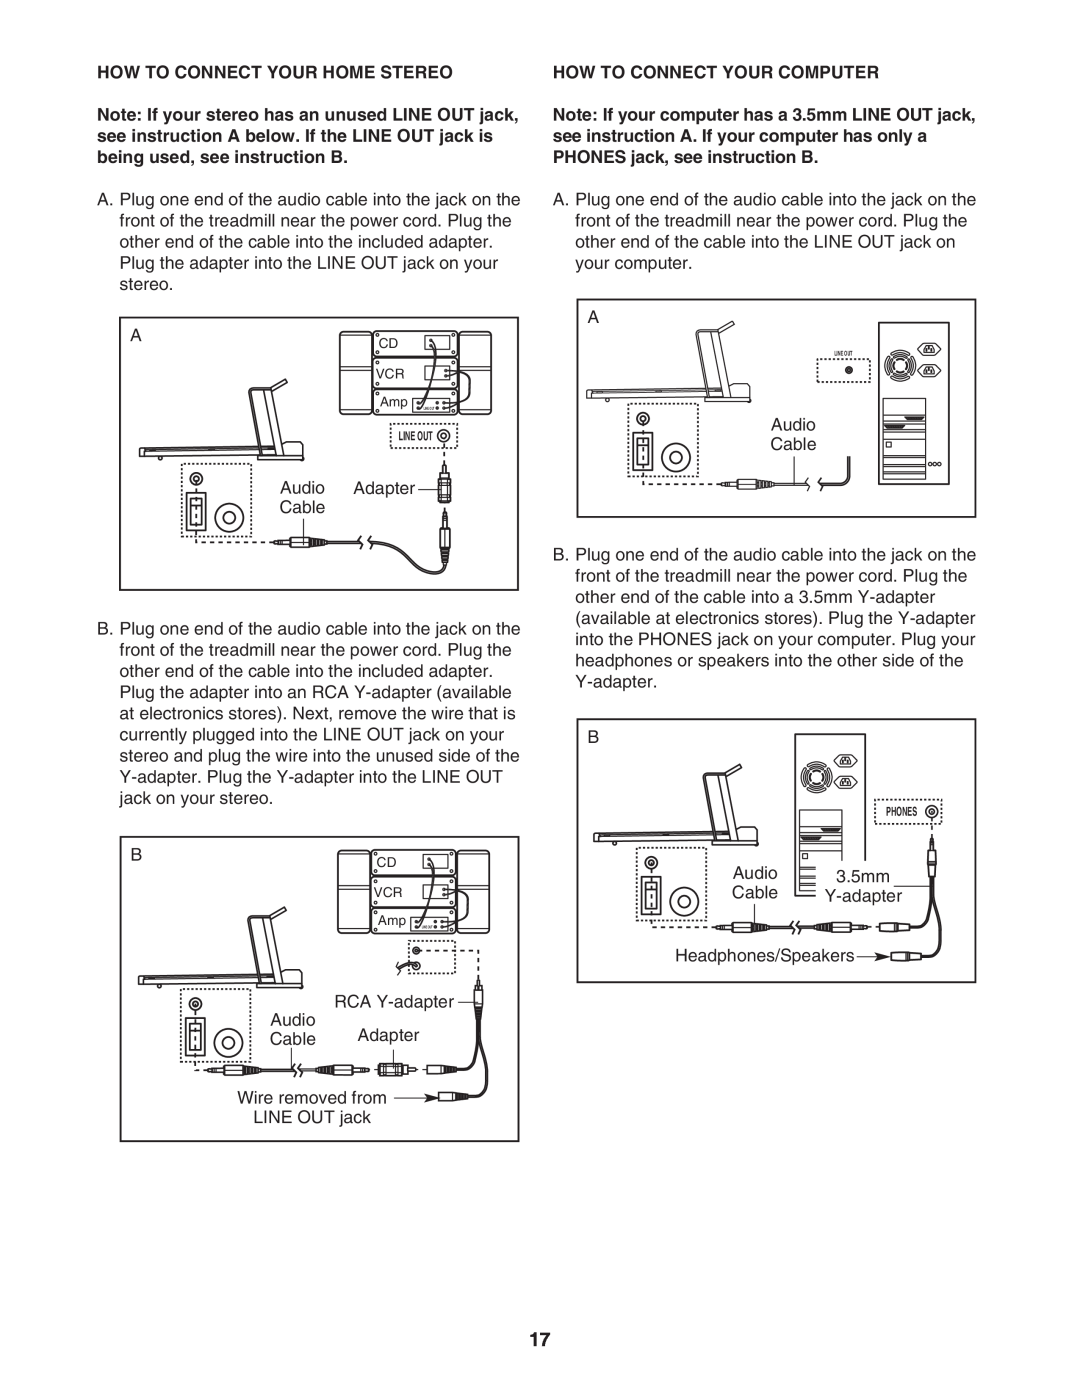 ProForm DTL73942 user manual How To Connect Your Home Stereo, How To Connect Your Computer 